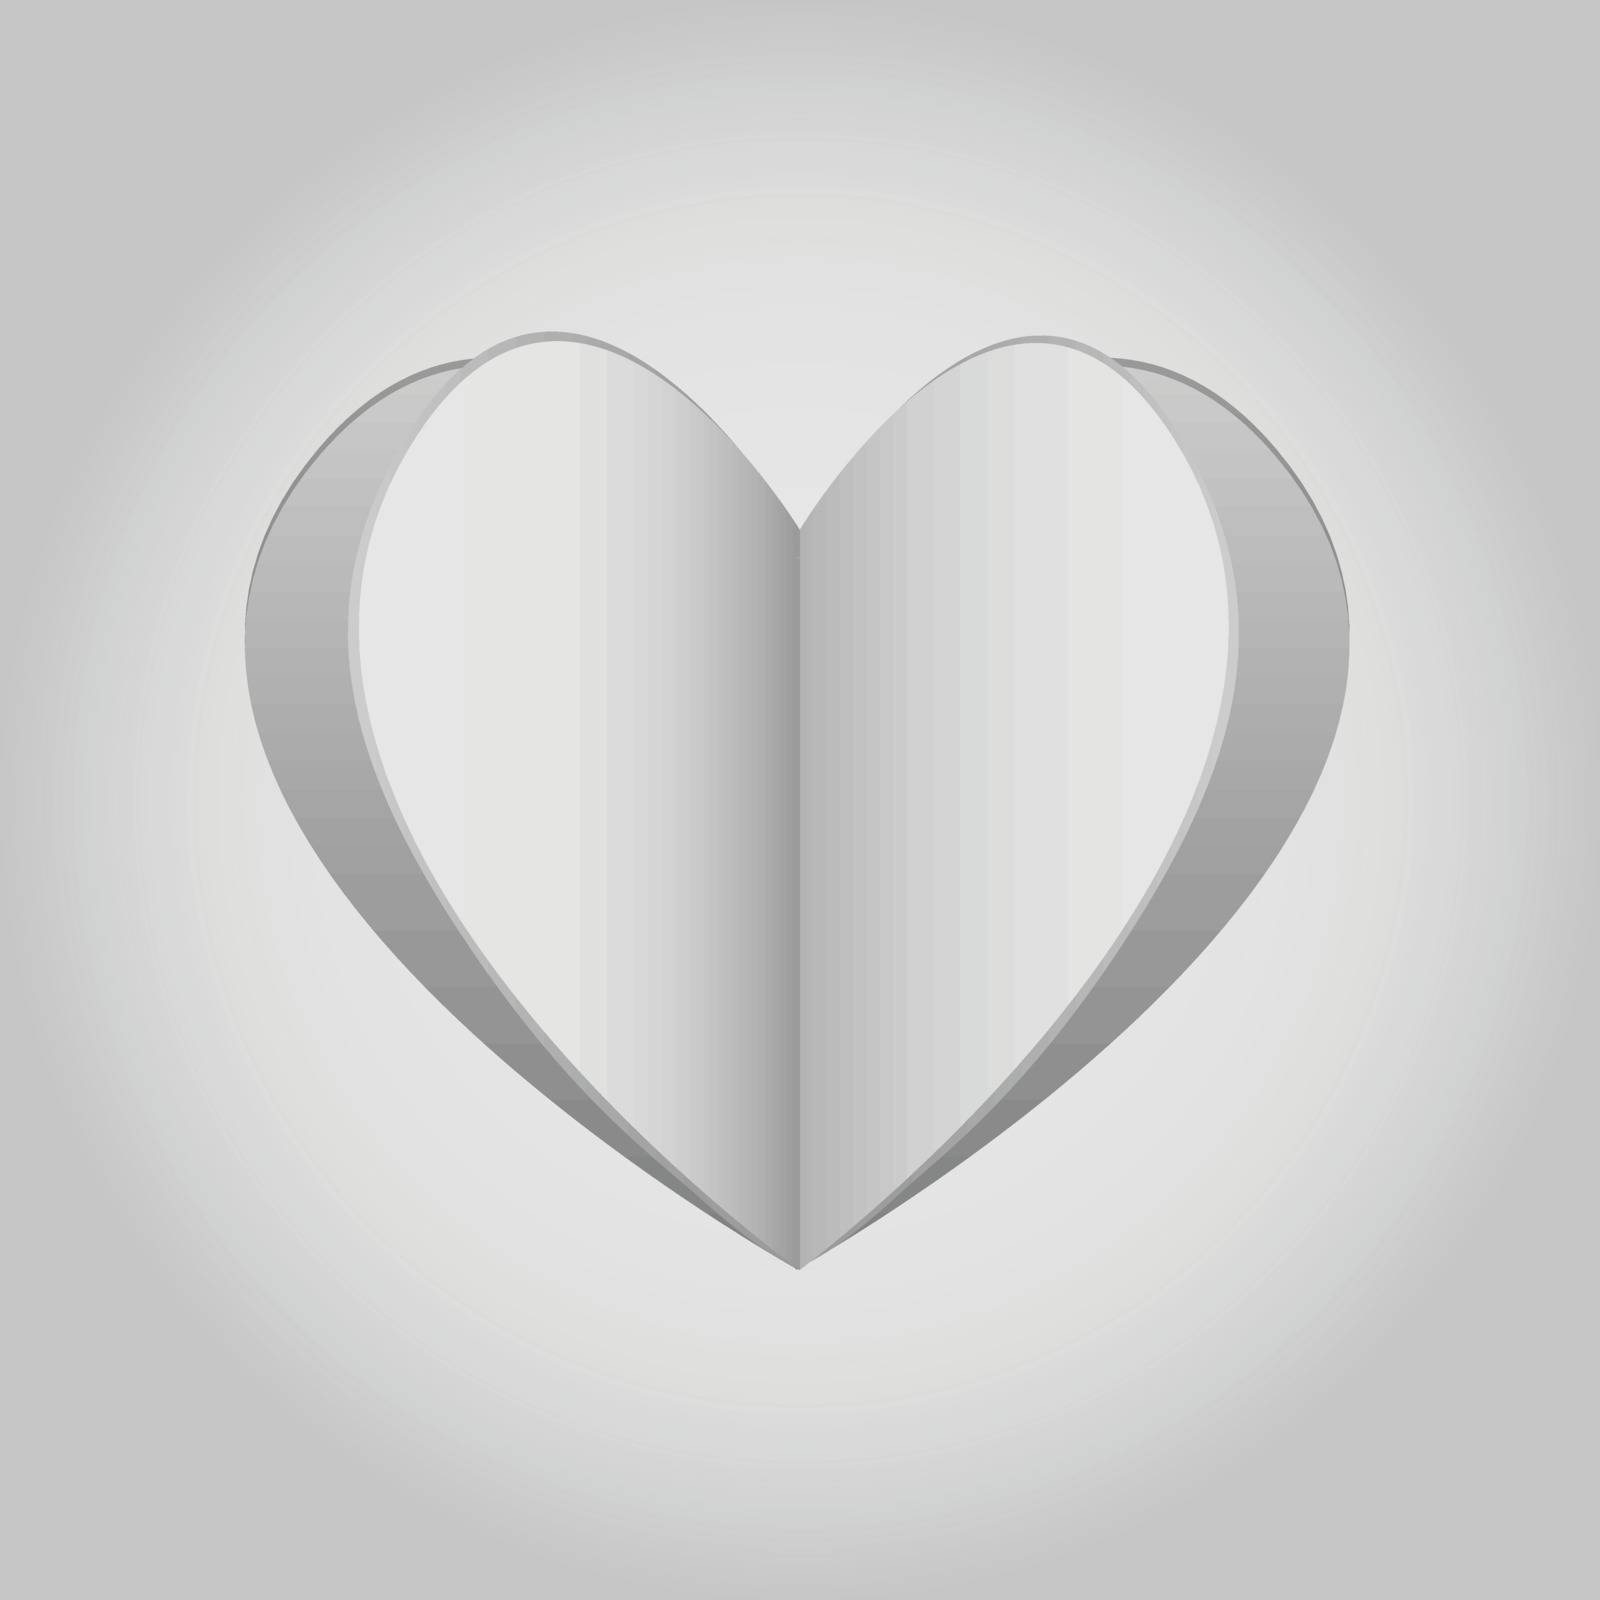 Cutout paper heart in white and grey shades